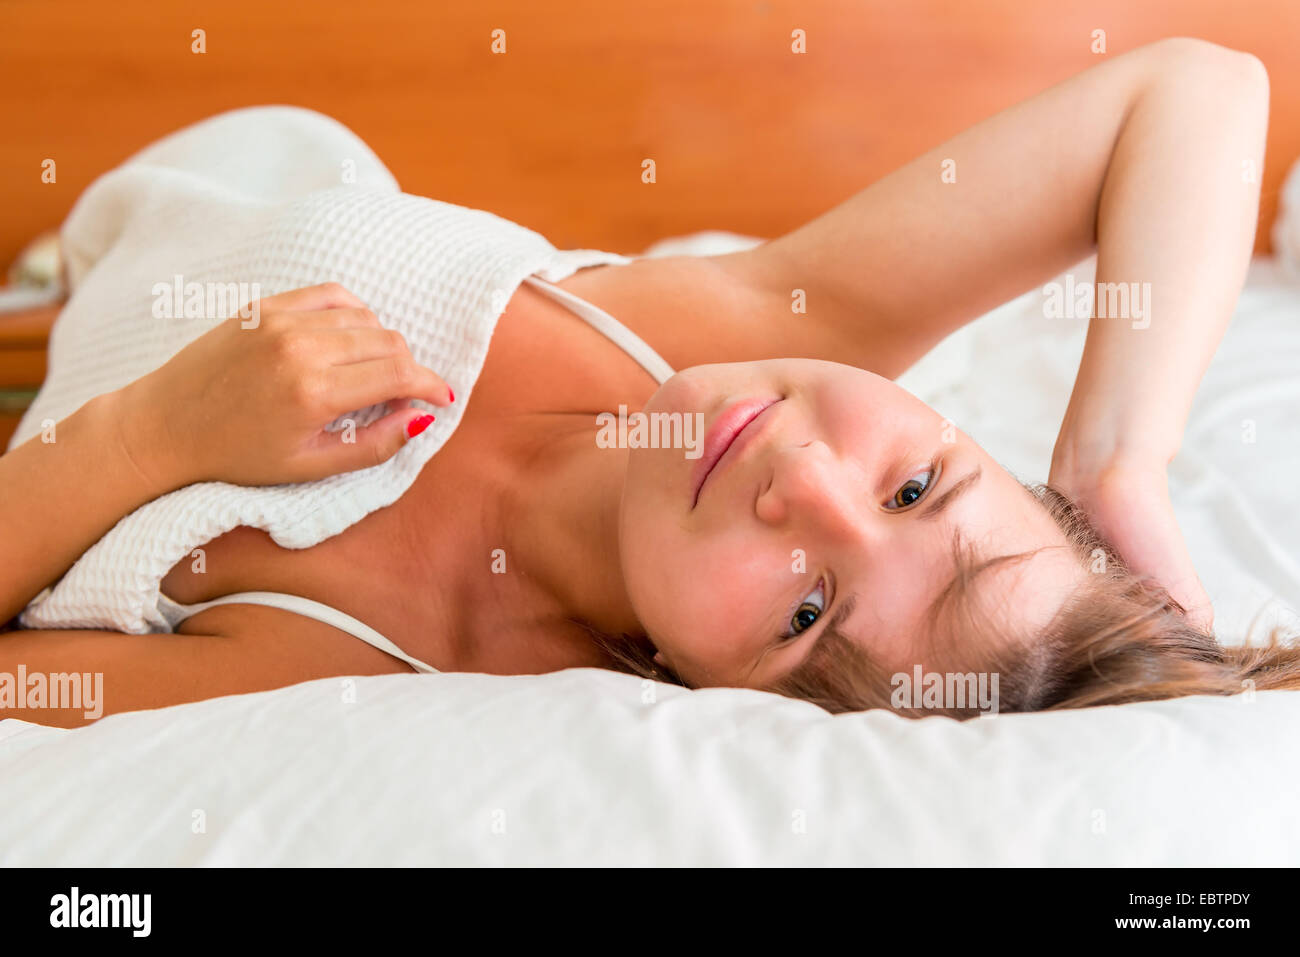 beautiful girl awoke and no hurry to get up Stock Photo